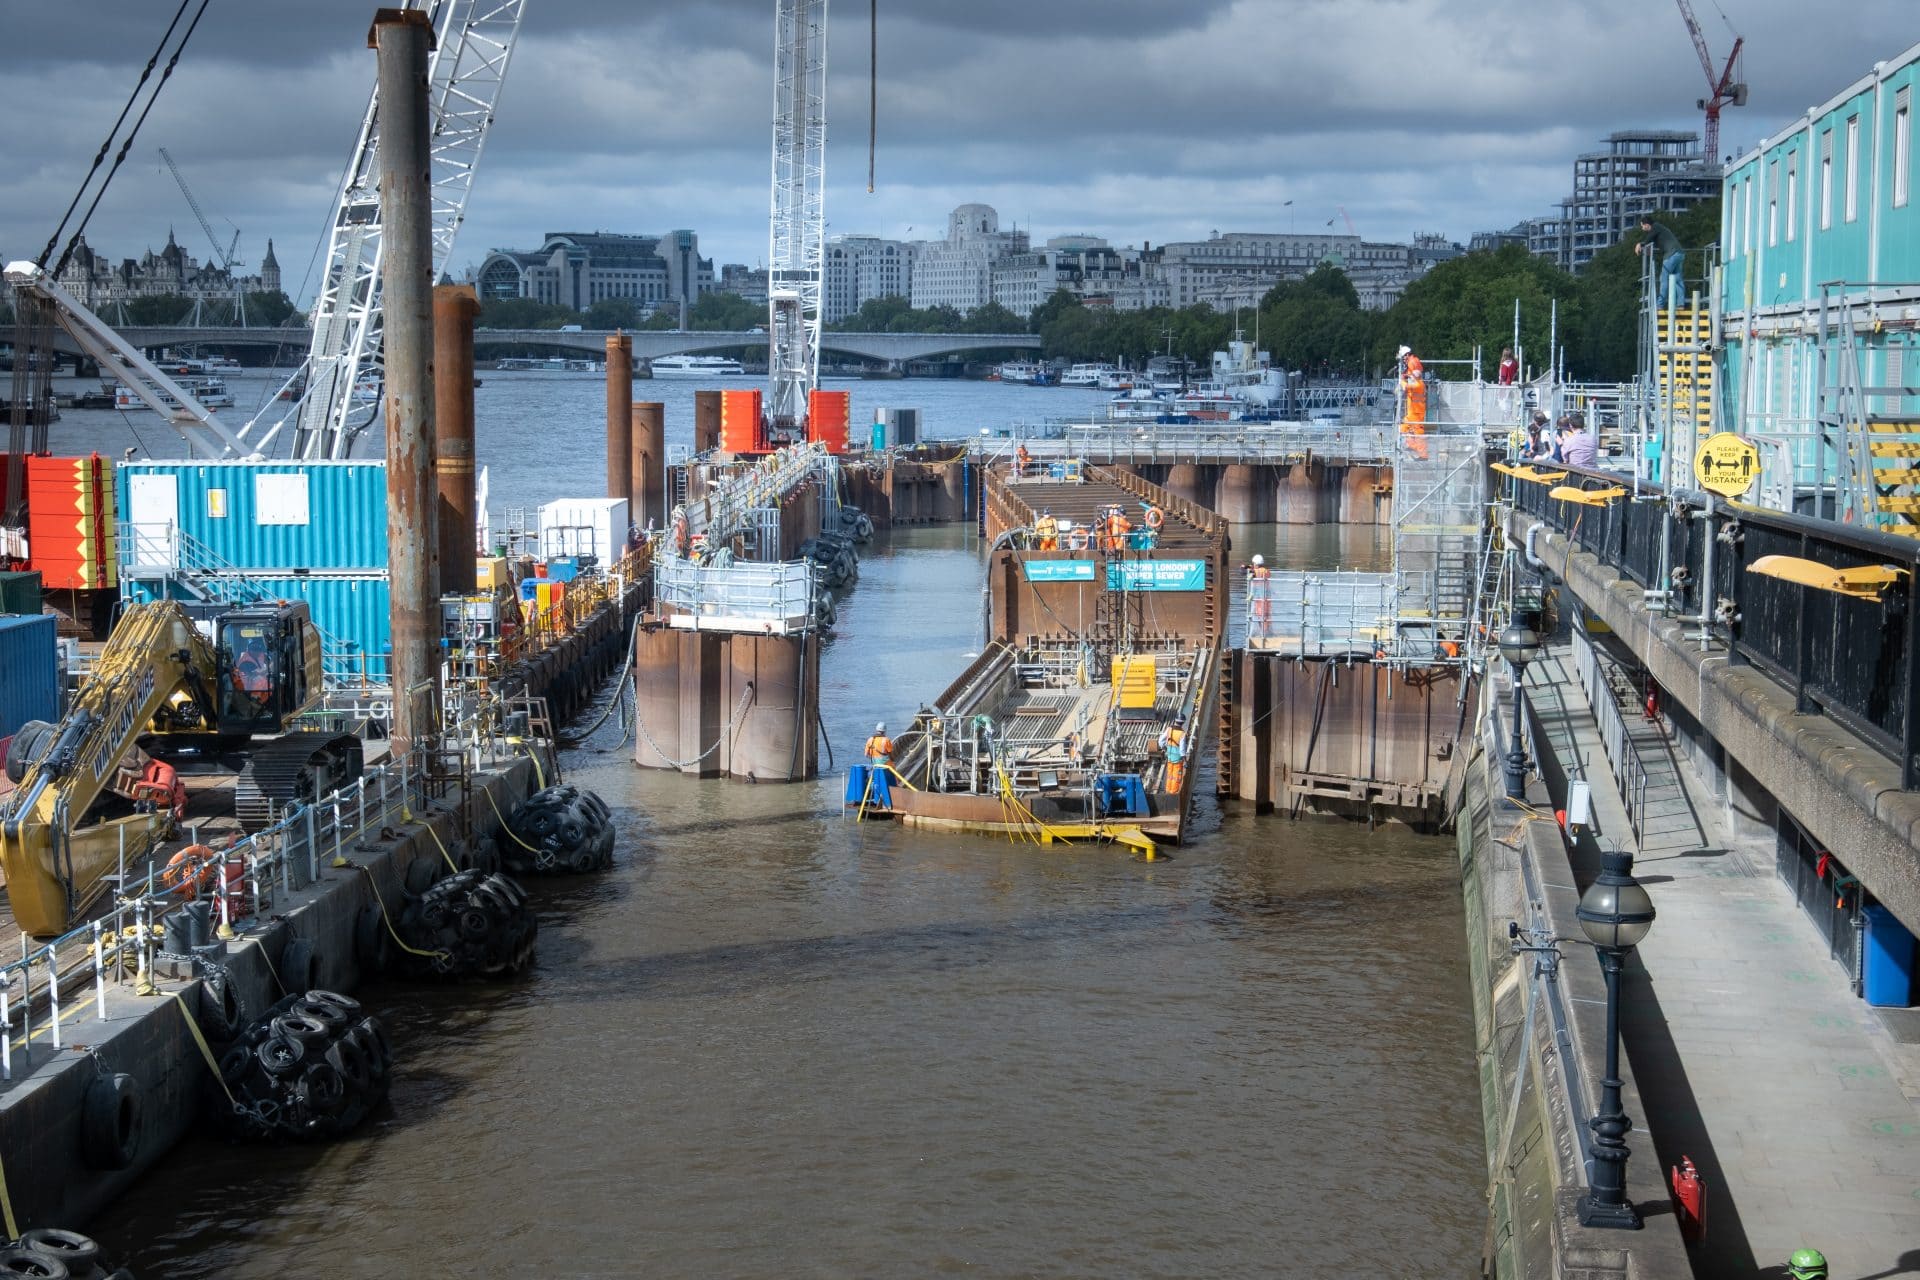 Sewer segment weighing 3,700 tonnes floated into place at Blackfriars